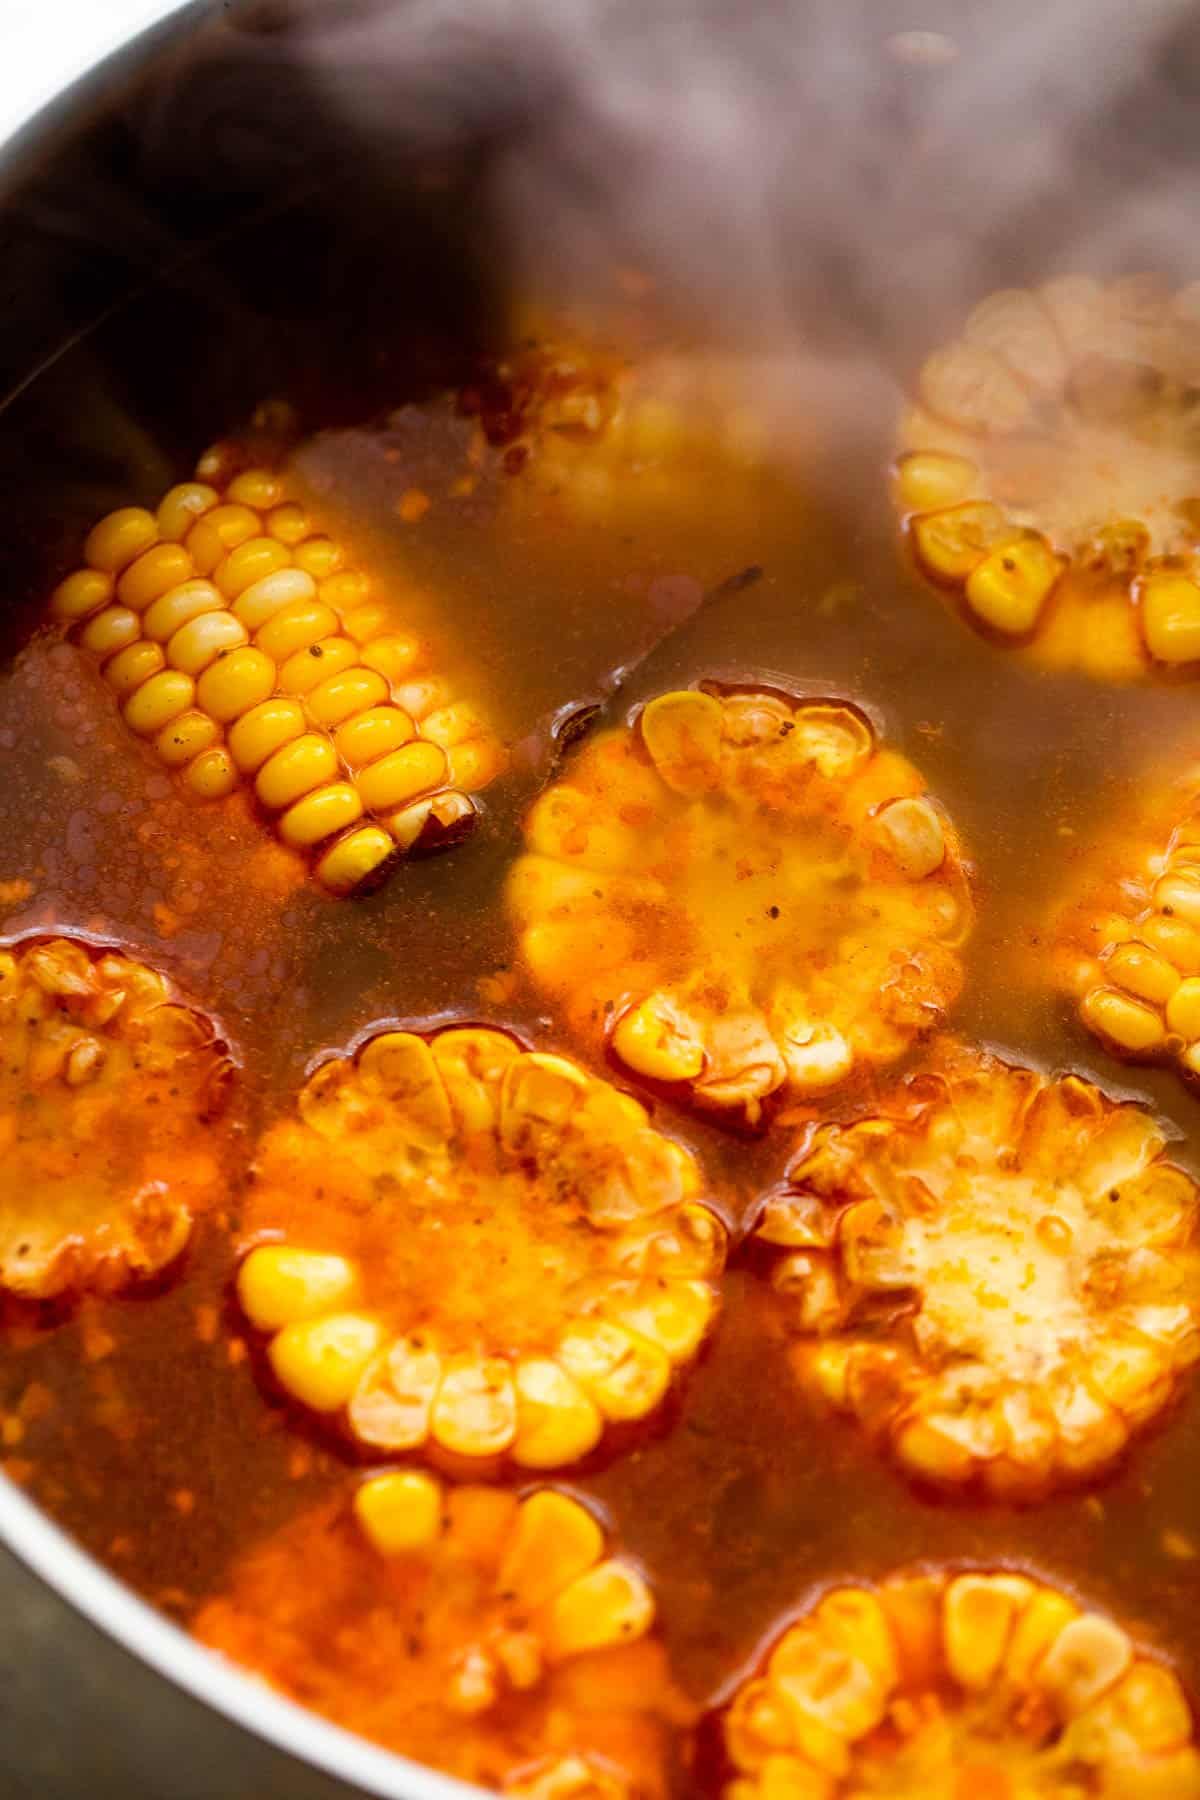 Boiling corn on the cob in a stockpot.